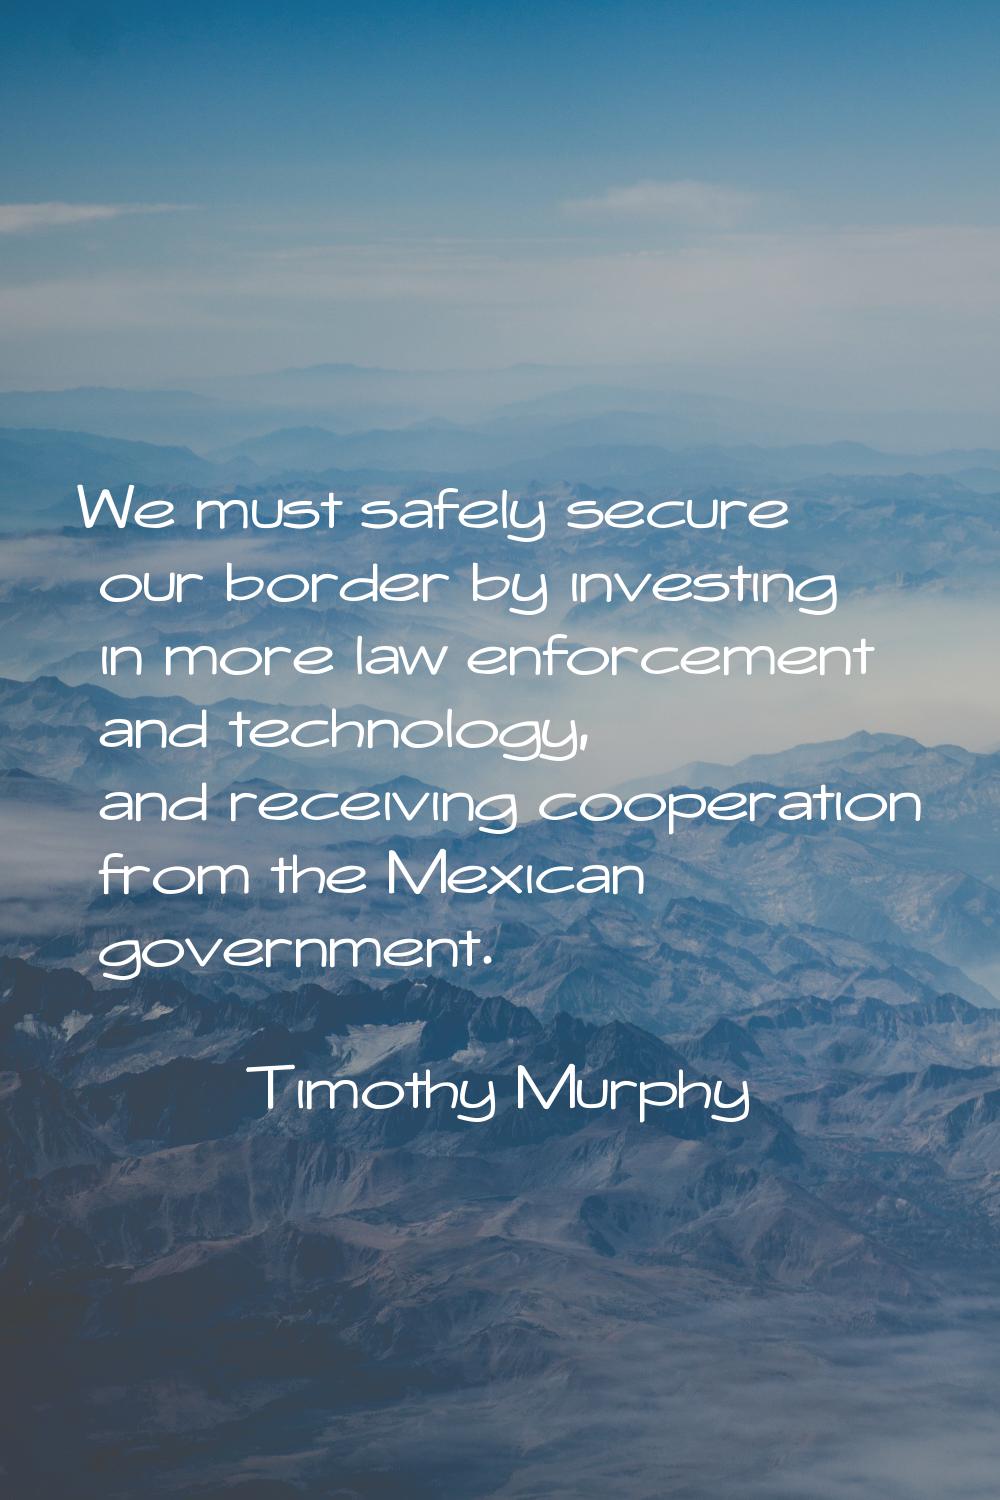 We must safely secure our border by investing in more law enforcement and technology, and receiving